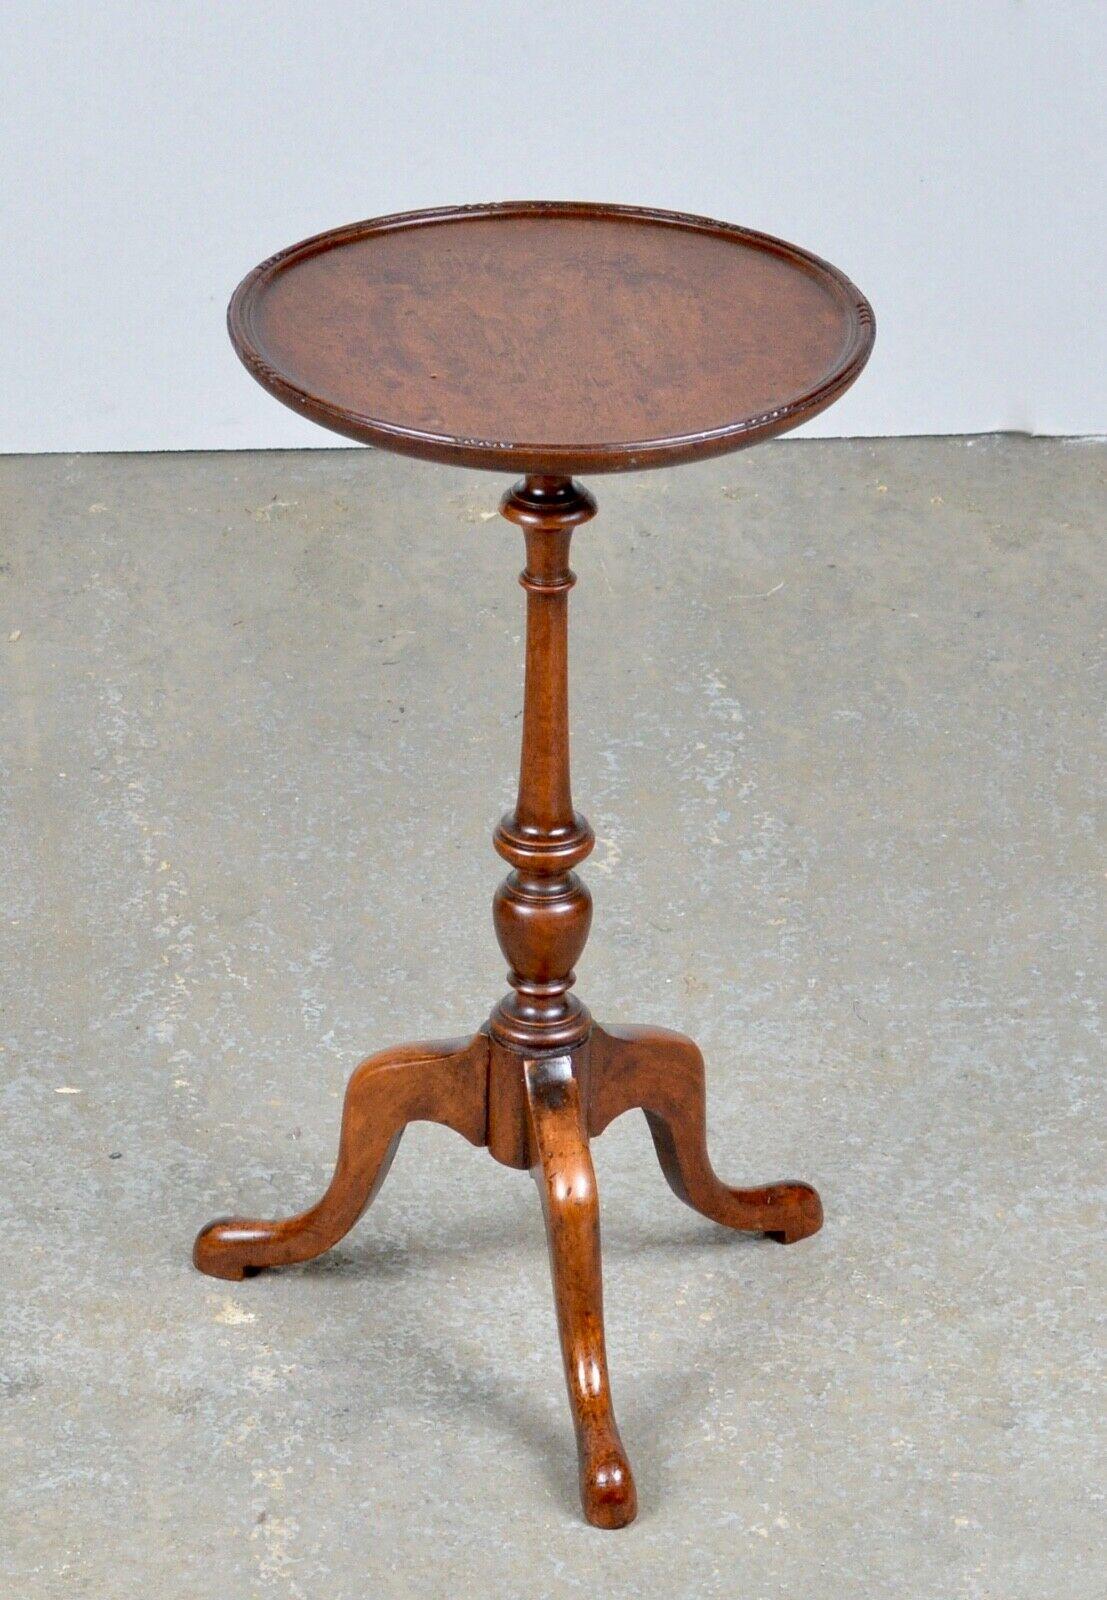 We are delighted to offer for sale this lovely antique Victorian mahogany lamp /side table with turned column base and carved top edge and is in good condition. 

Dimensions

Height : 55cm
Width: 30cm
Depth: 30cm 

All our items are cleaned,